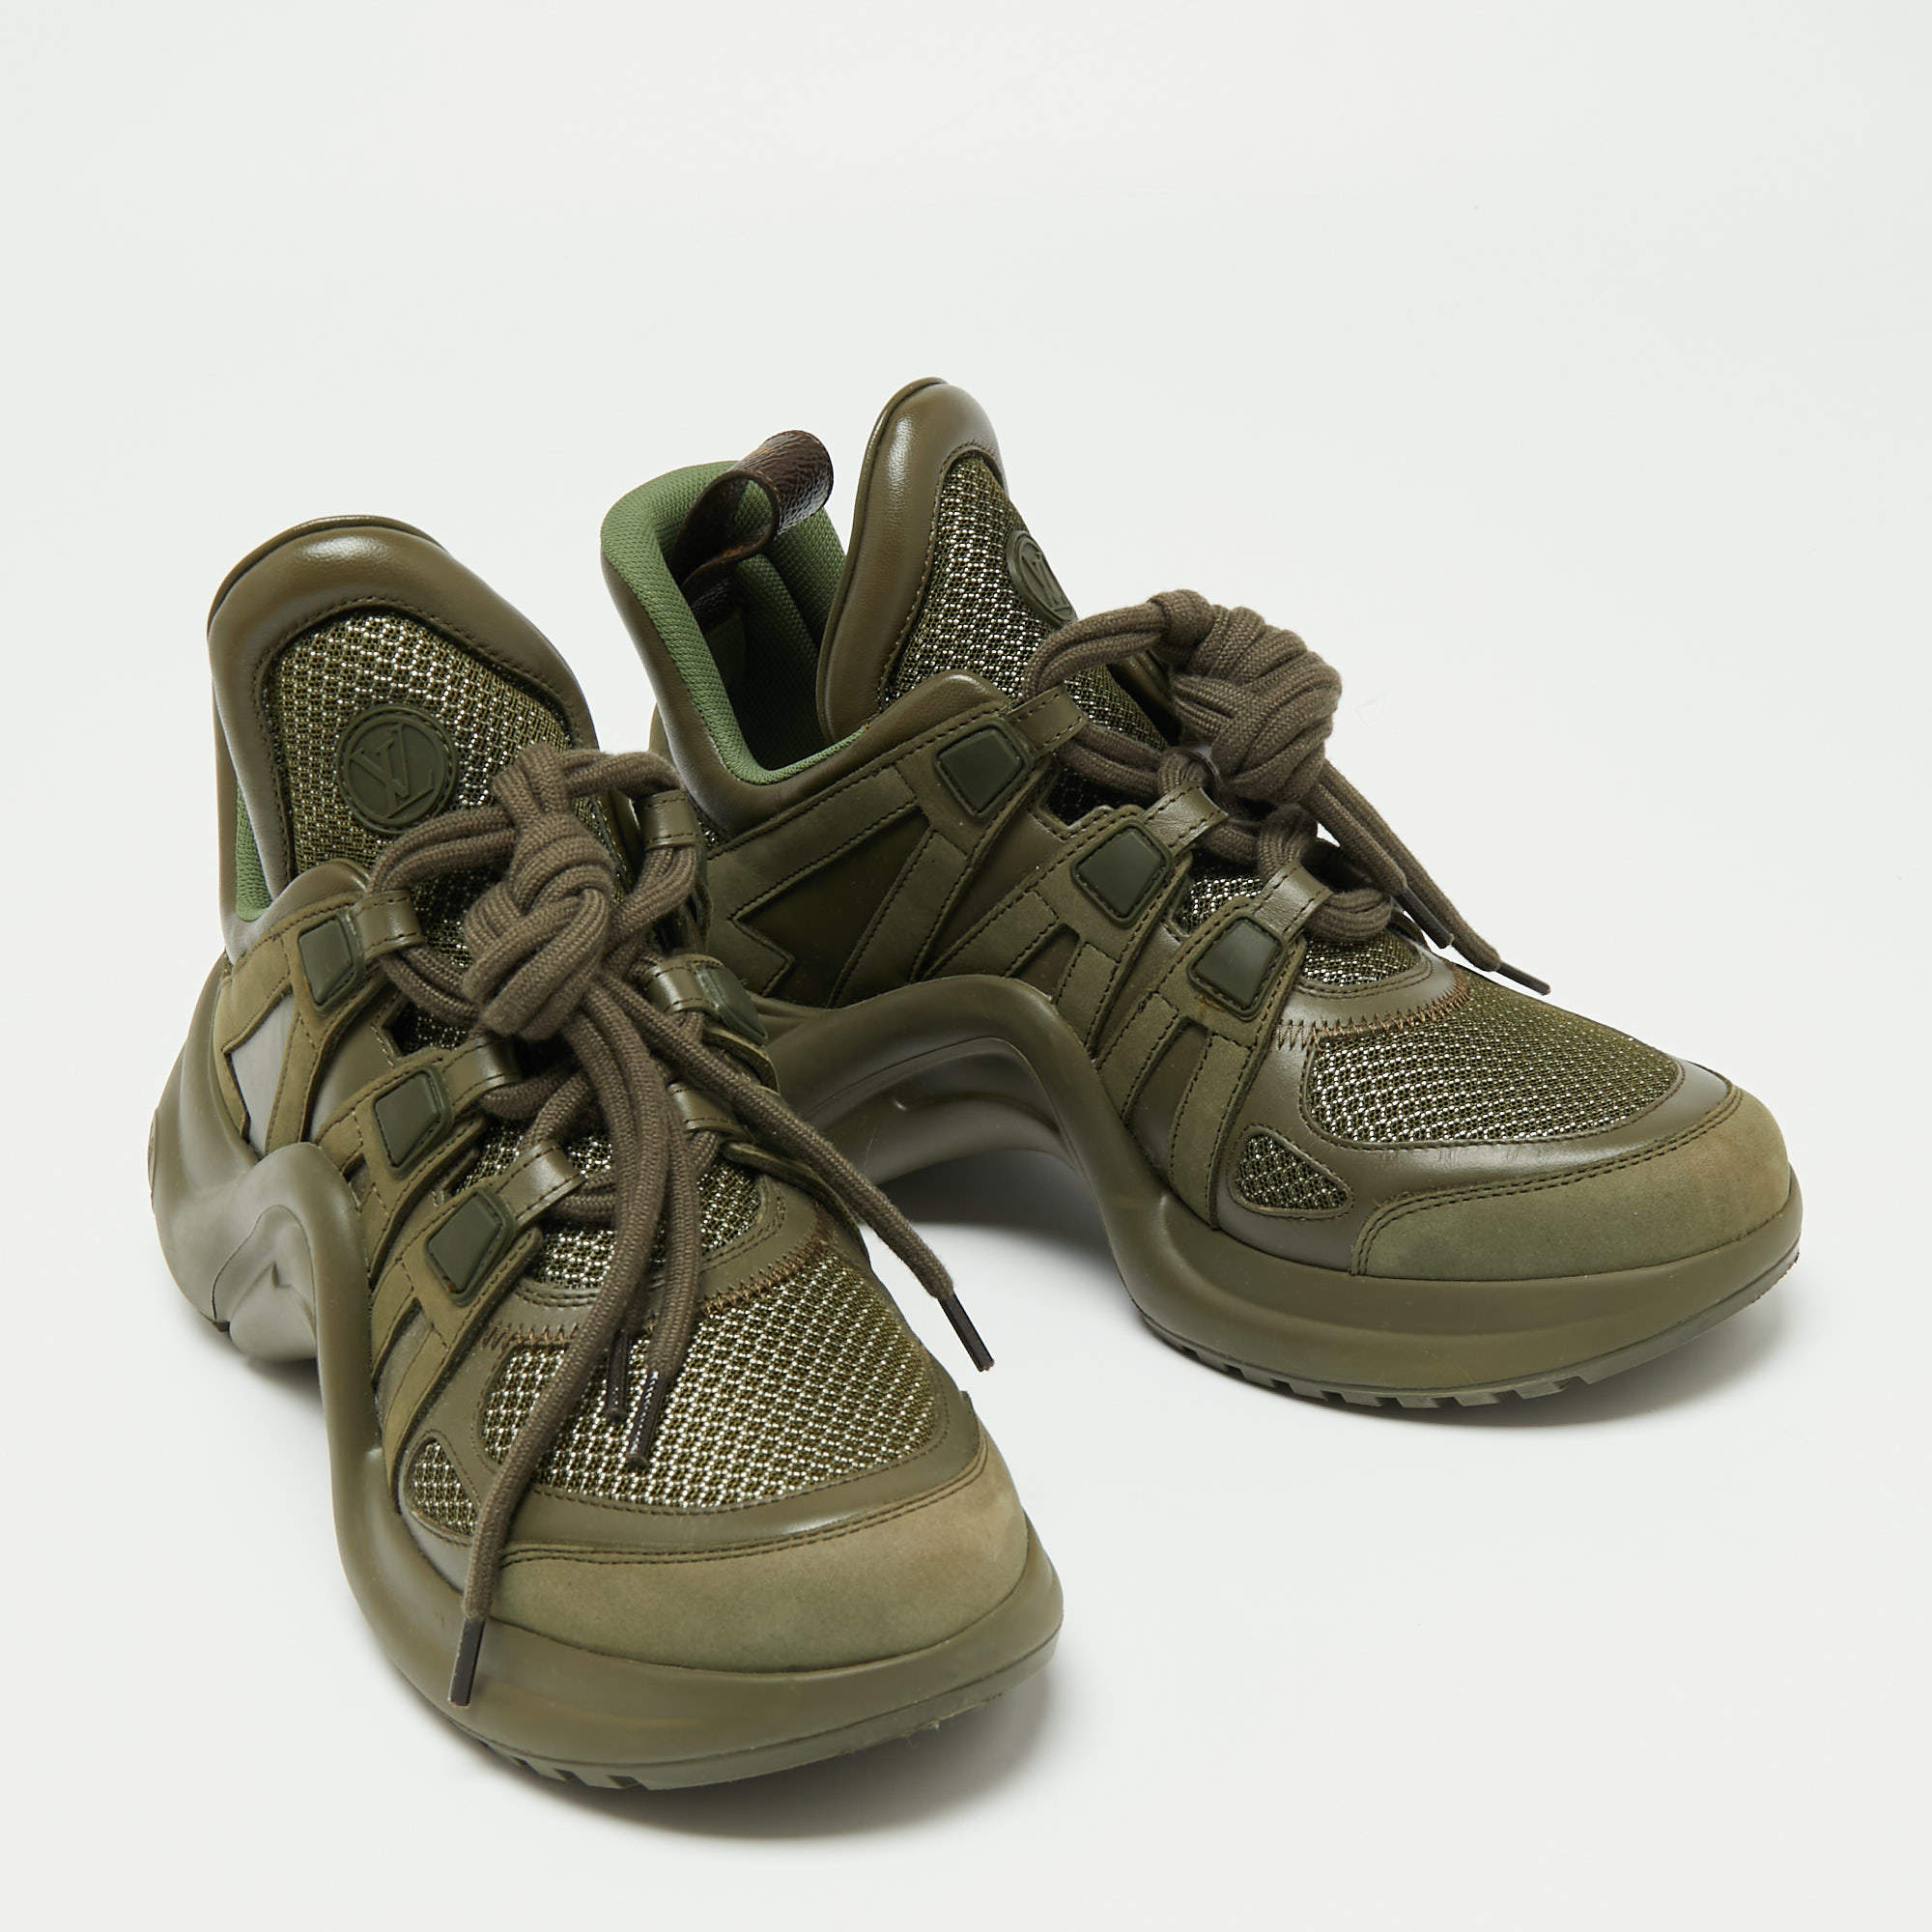 Louis Vuitton Olive Green Mesh and Leather Archlight Sneakers Size 38.5  Louis Vuitton